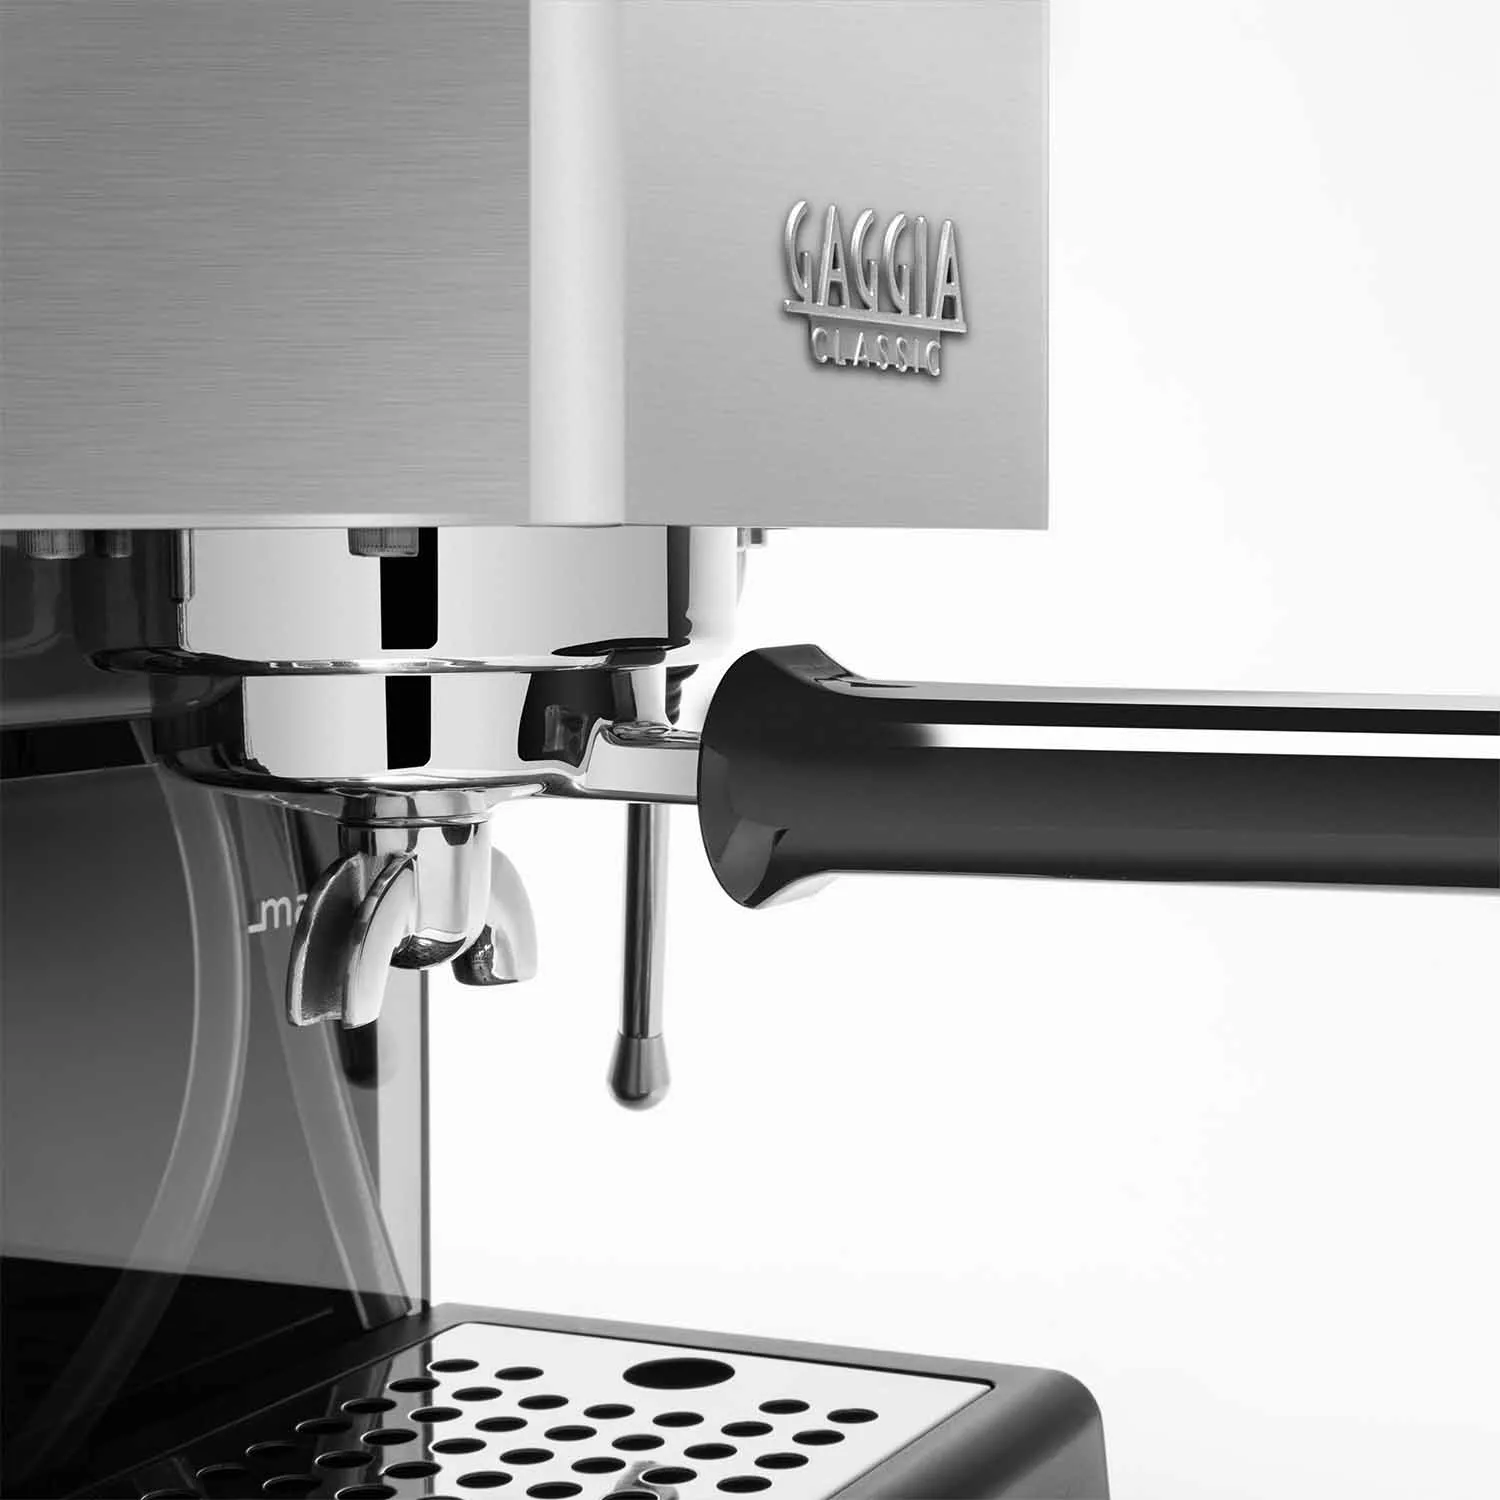 Gaggia Classic Pro Review: a machine for experts and modifications